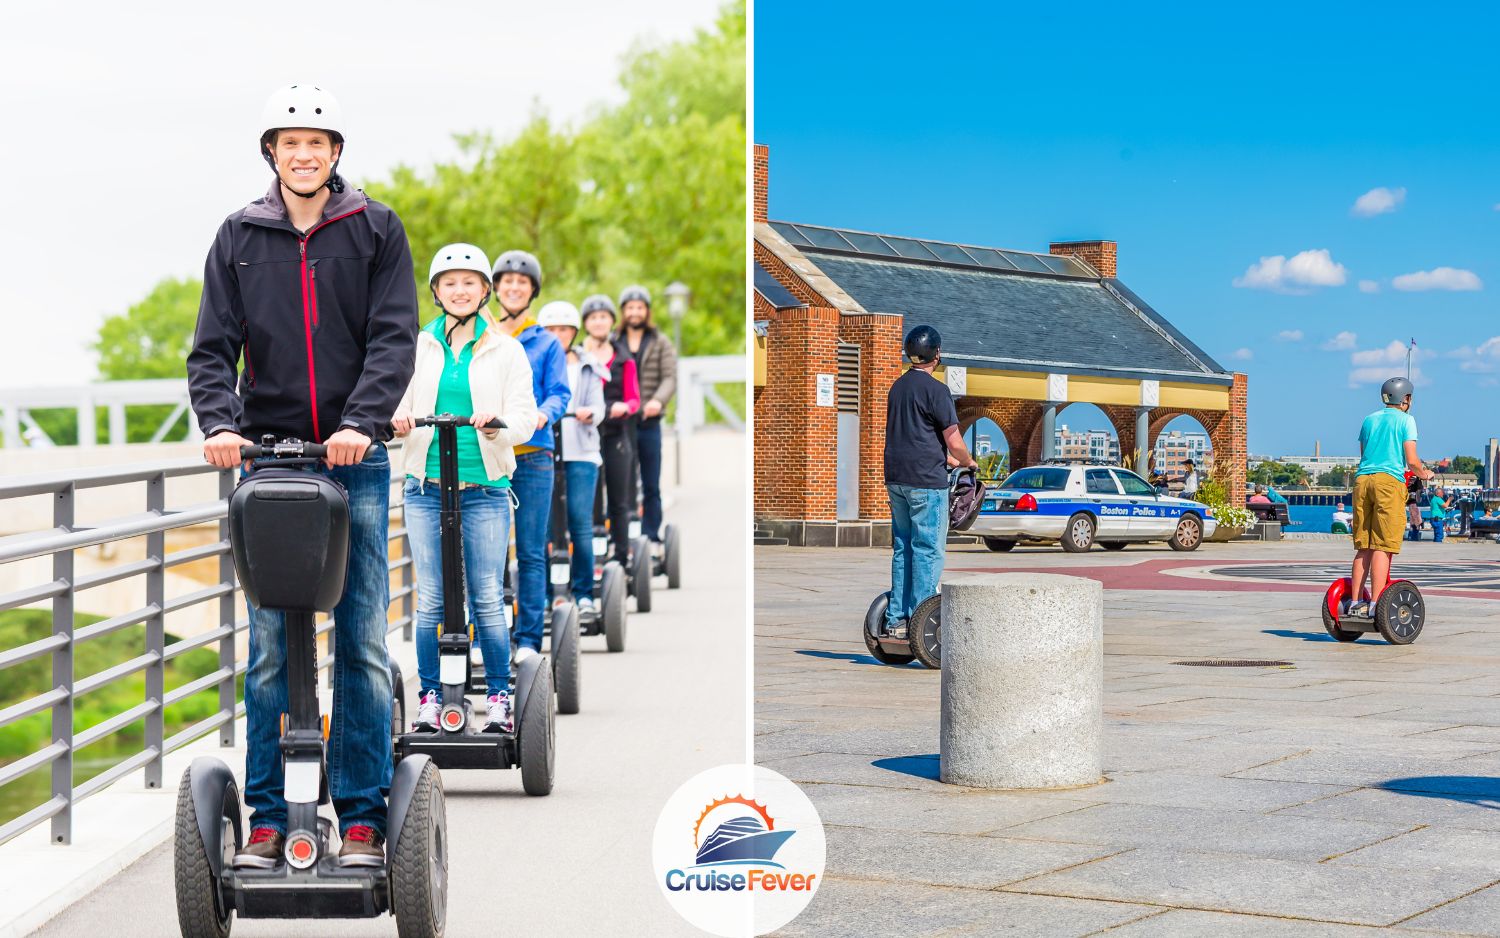 People riding segways in single file in city